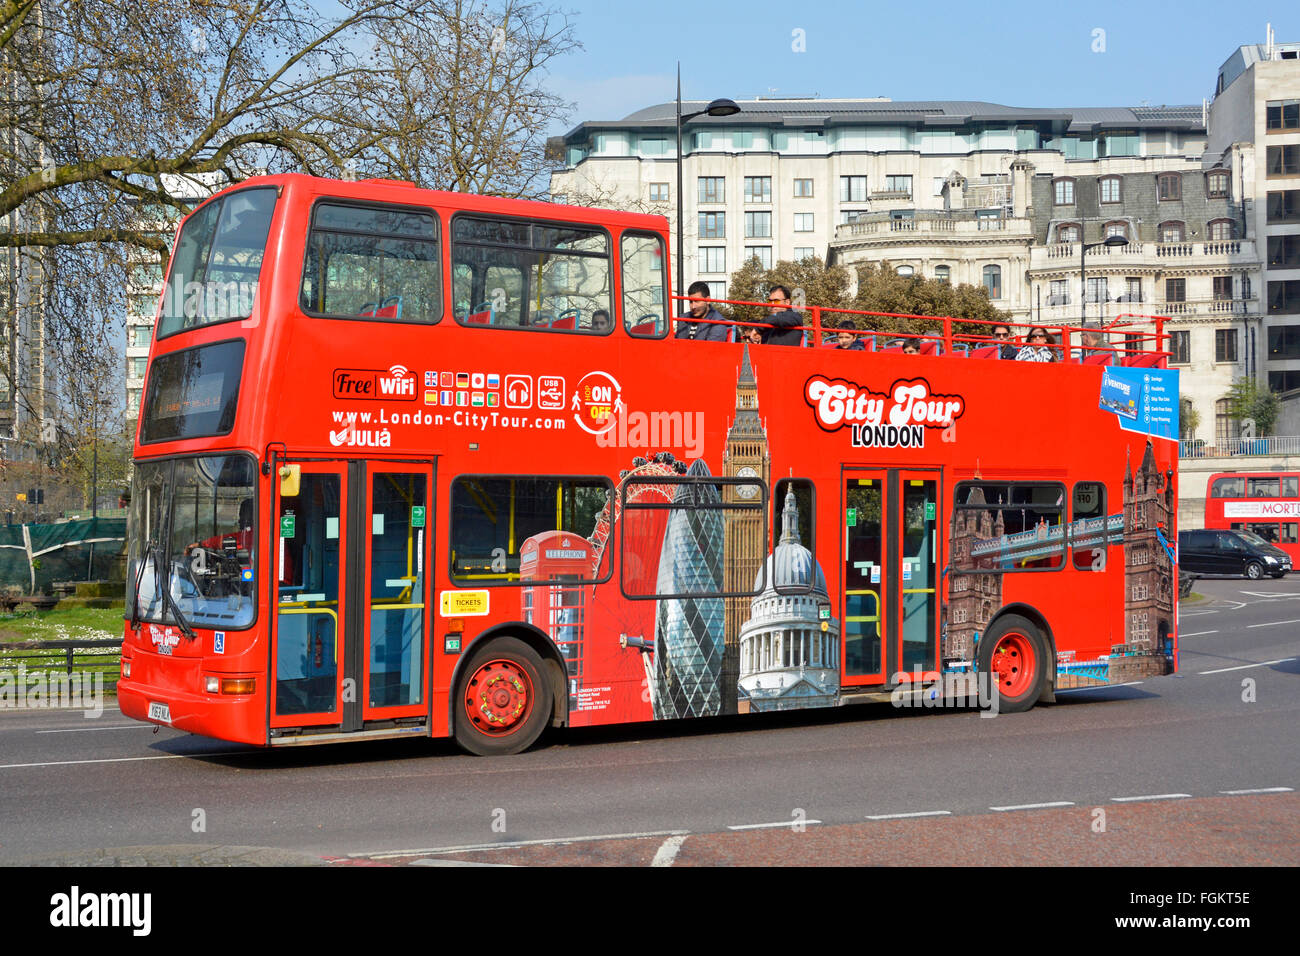 Open top tour bus double decker operated by City Tour providing a London sightseeing tourism trip seen here in Park Lane Mayfair UK Stock Photo